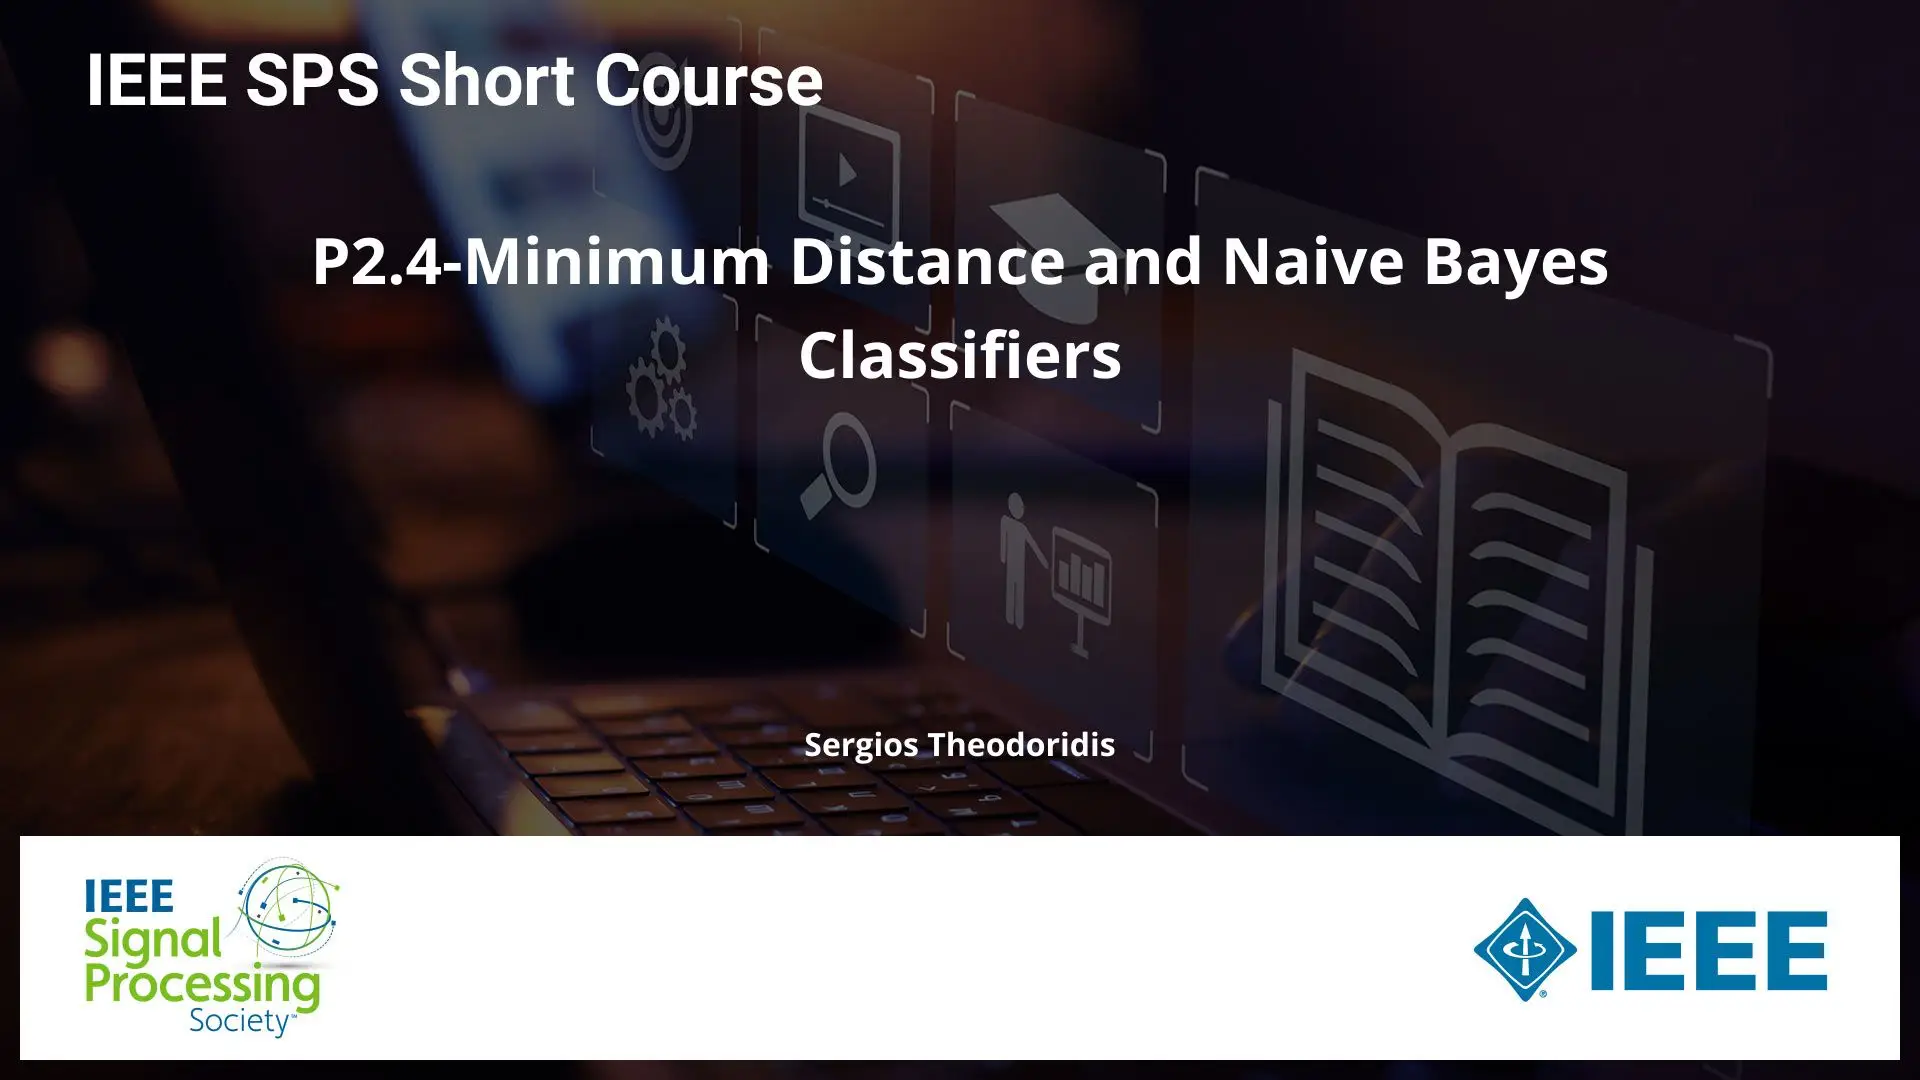 P2.4-Minimum Distance and Naive Bayes Classifiers